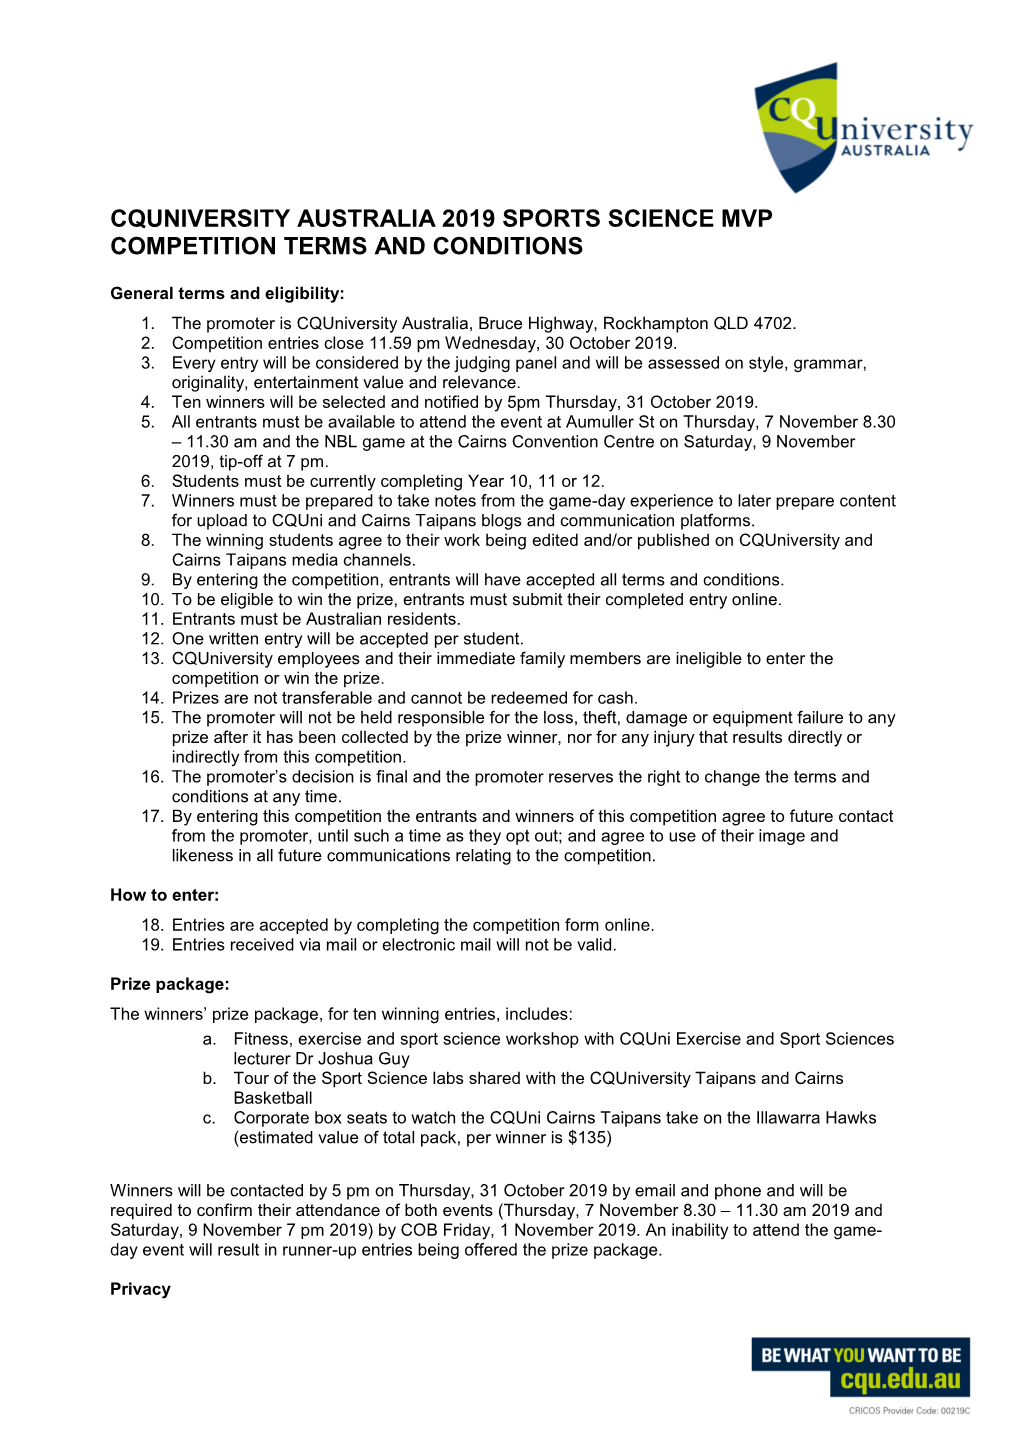 Cquniversity Australia 2019 Sports Science Mvp Competition Terms and Conditions